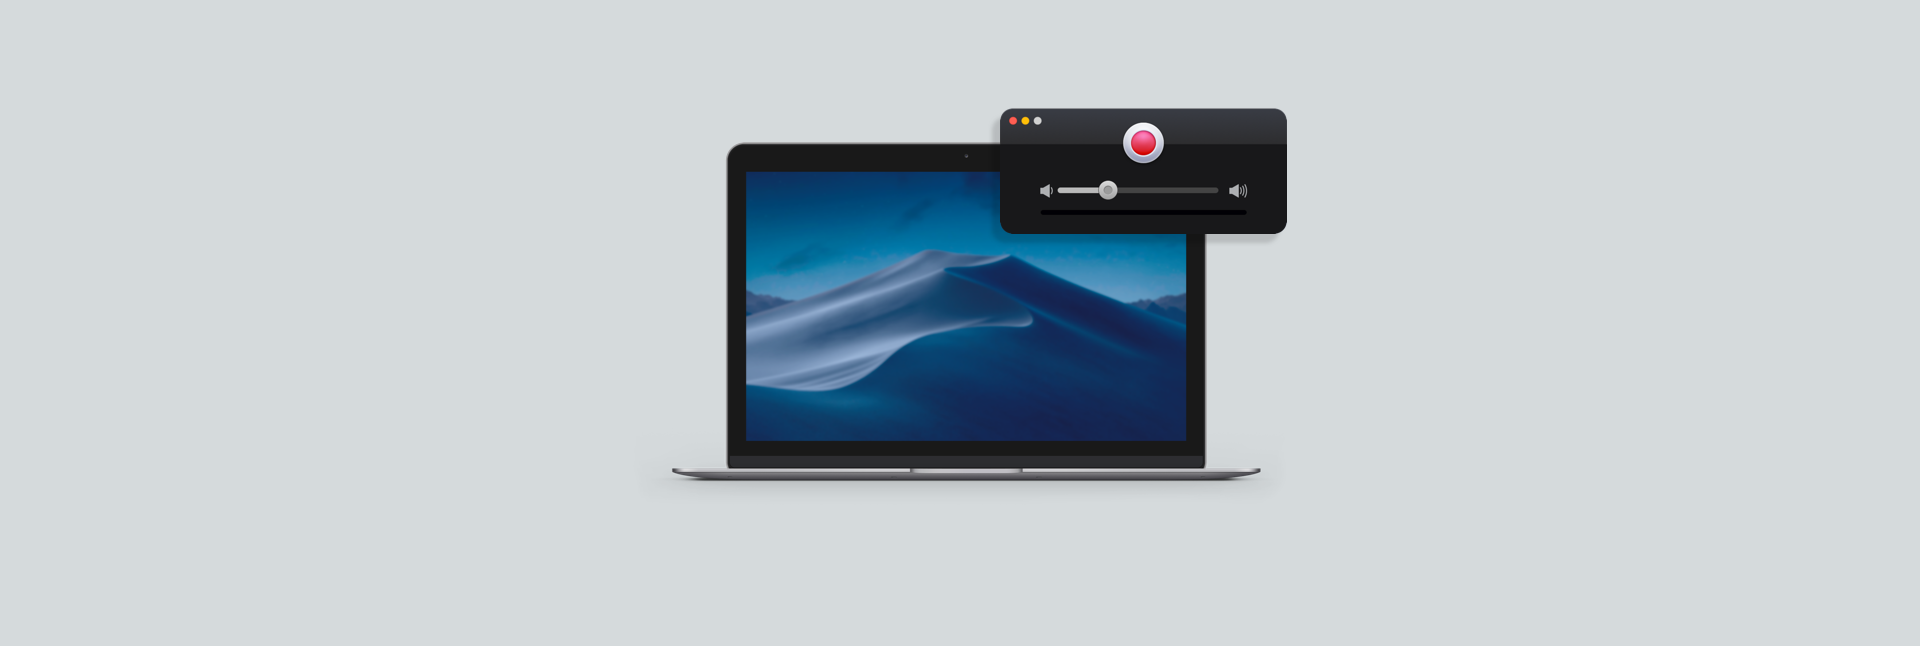 how to record audio from mac speaker